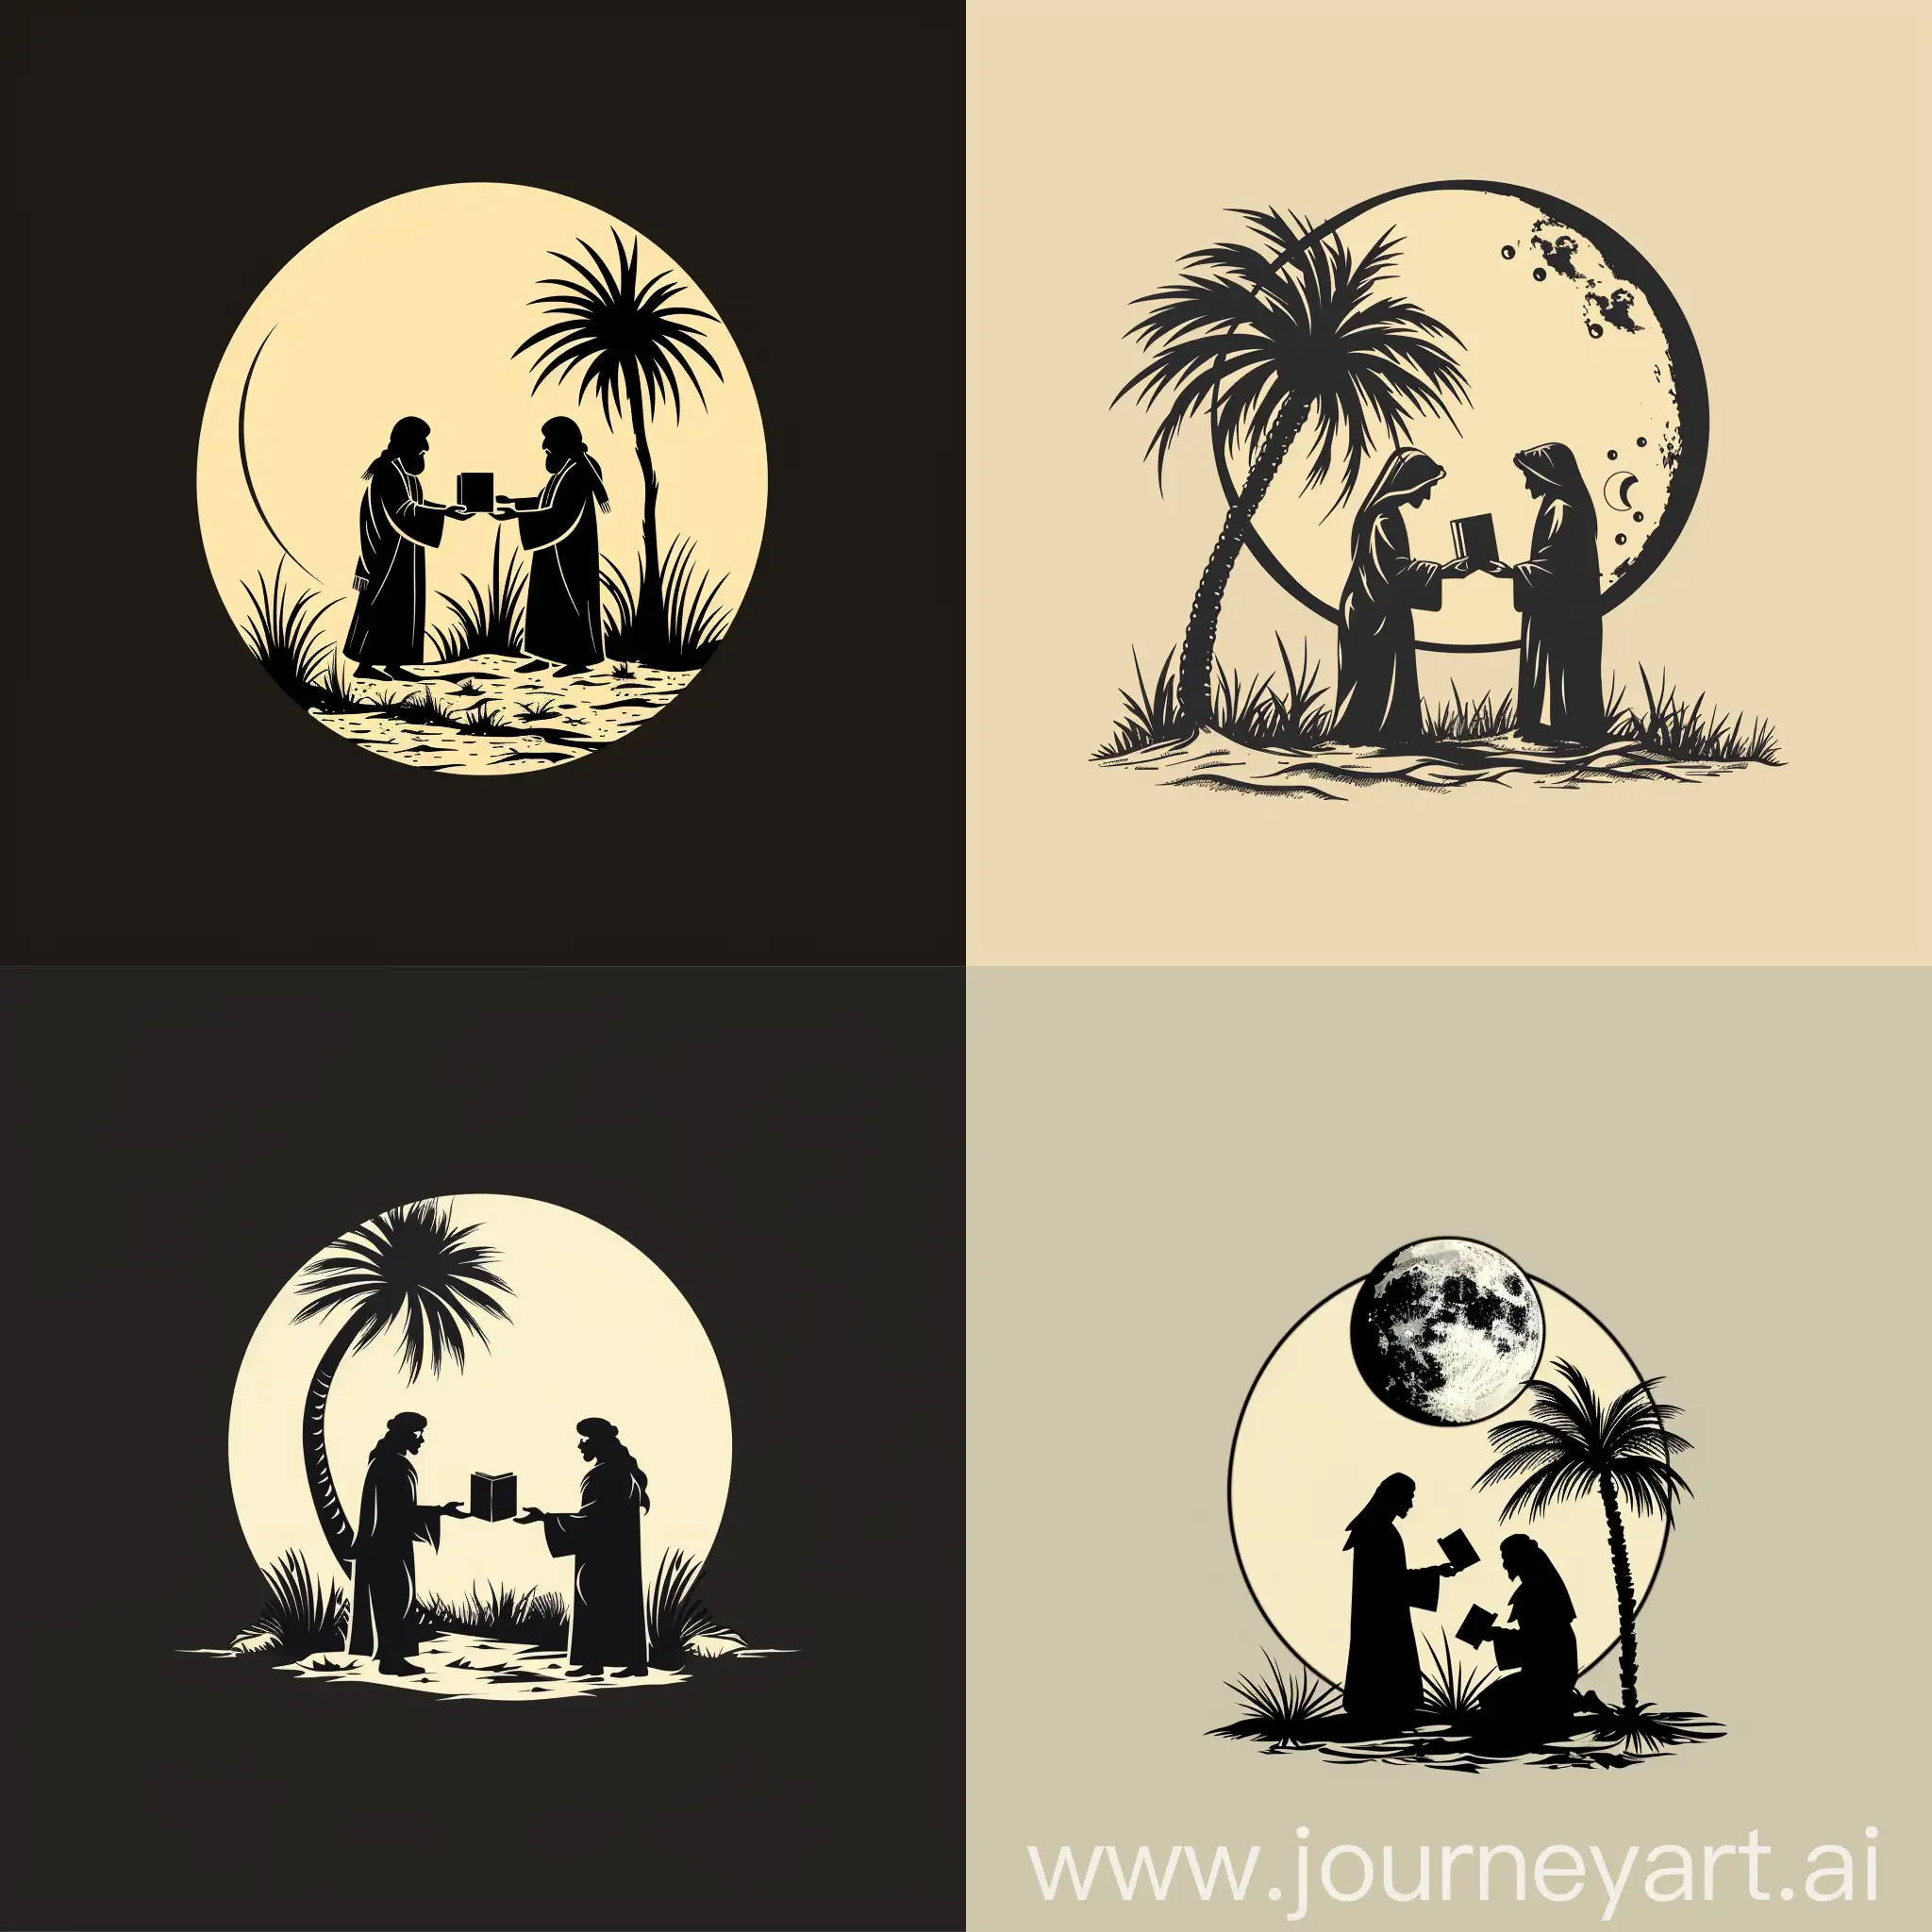 Bedouin-Men-Exchanging-Books-under-Palm-Tree-in-Oasis-at-Night